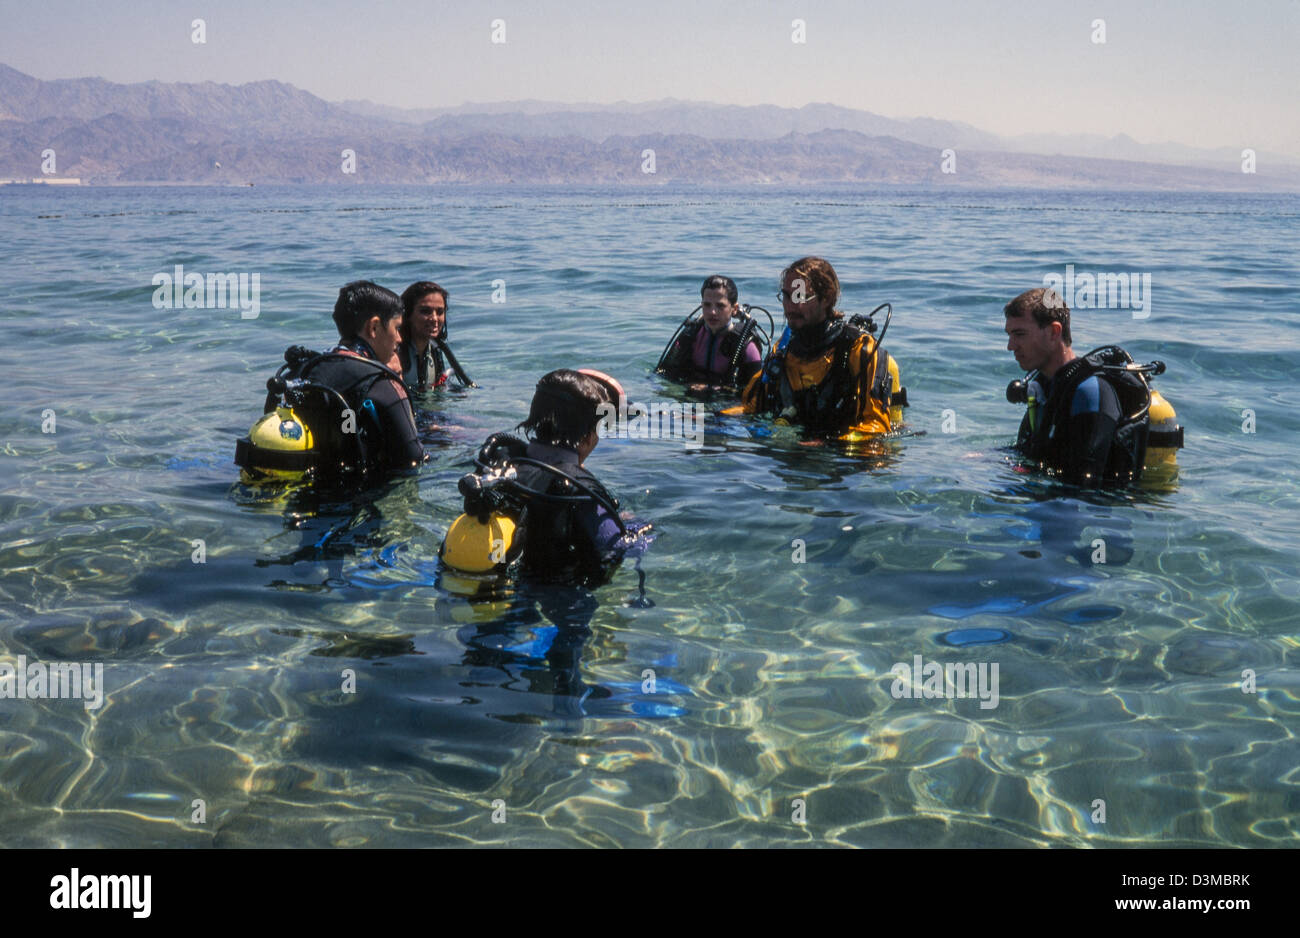 Beginners in diving instructed by the teacher. Stock Photo